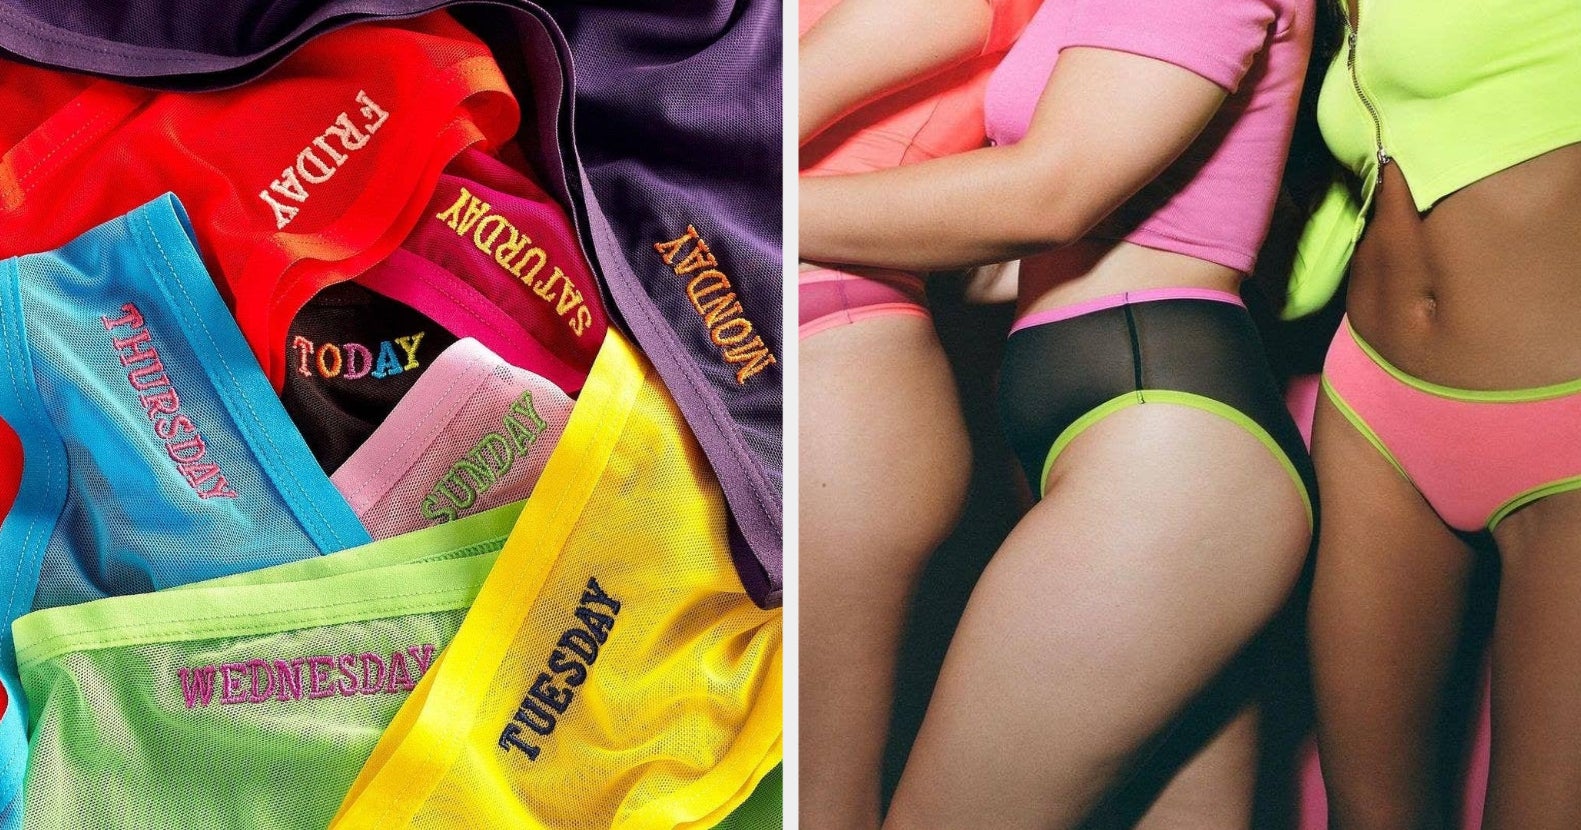 Parade Days of the Week Underwear Collection